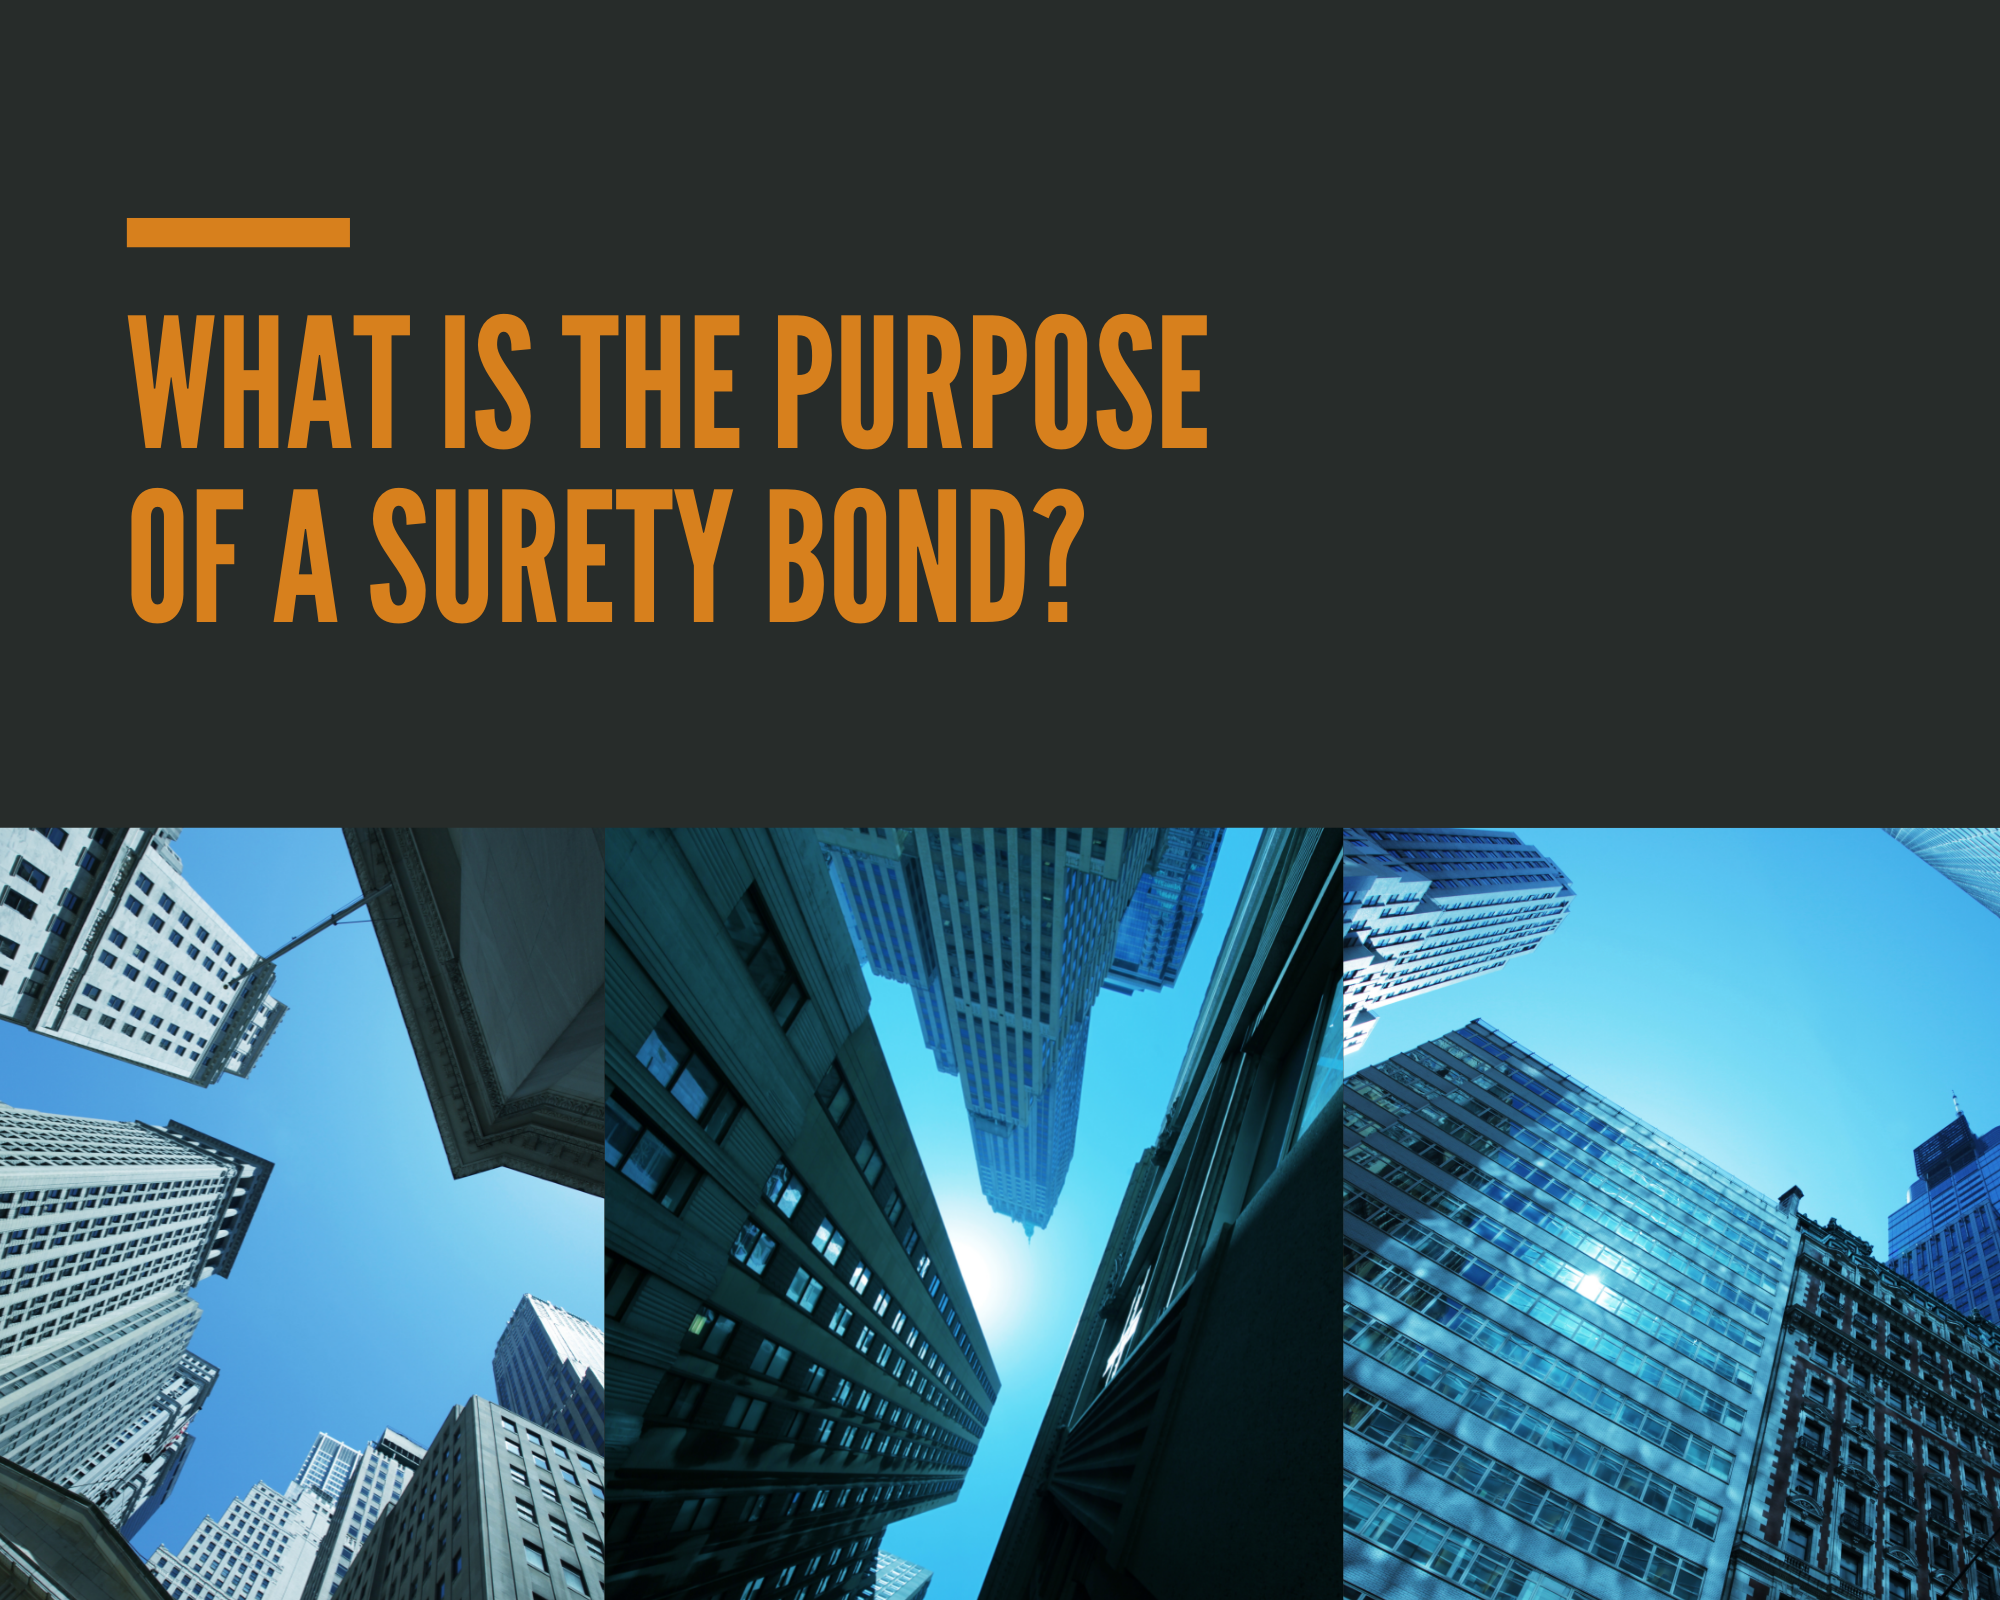 surety bond - what is the purpose of a surety bond - buildings in black background